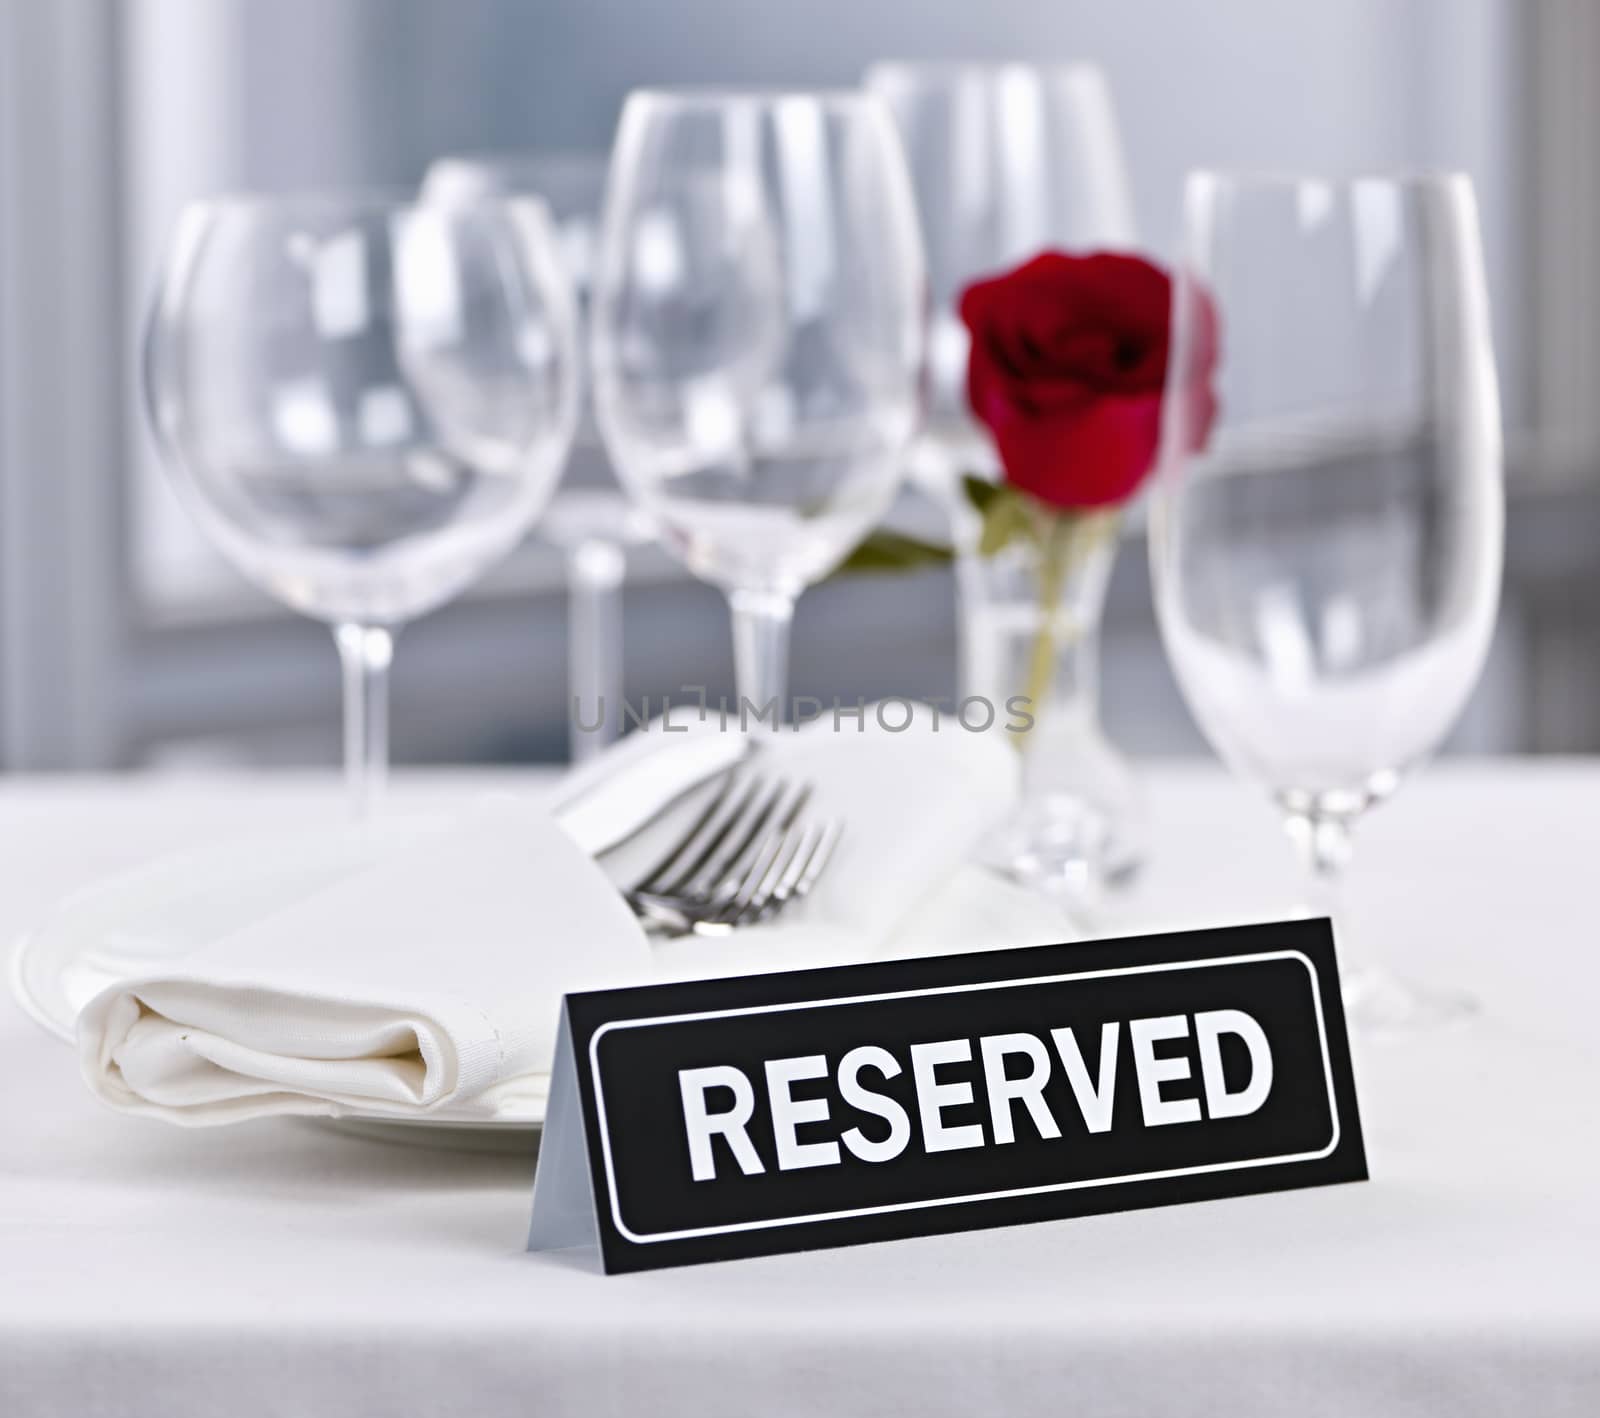 Reserved table at romantic restaurant by elenathewise